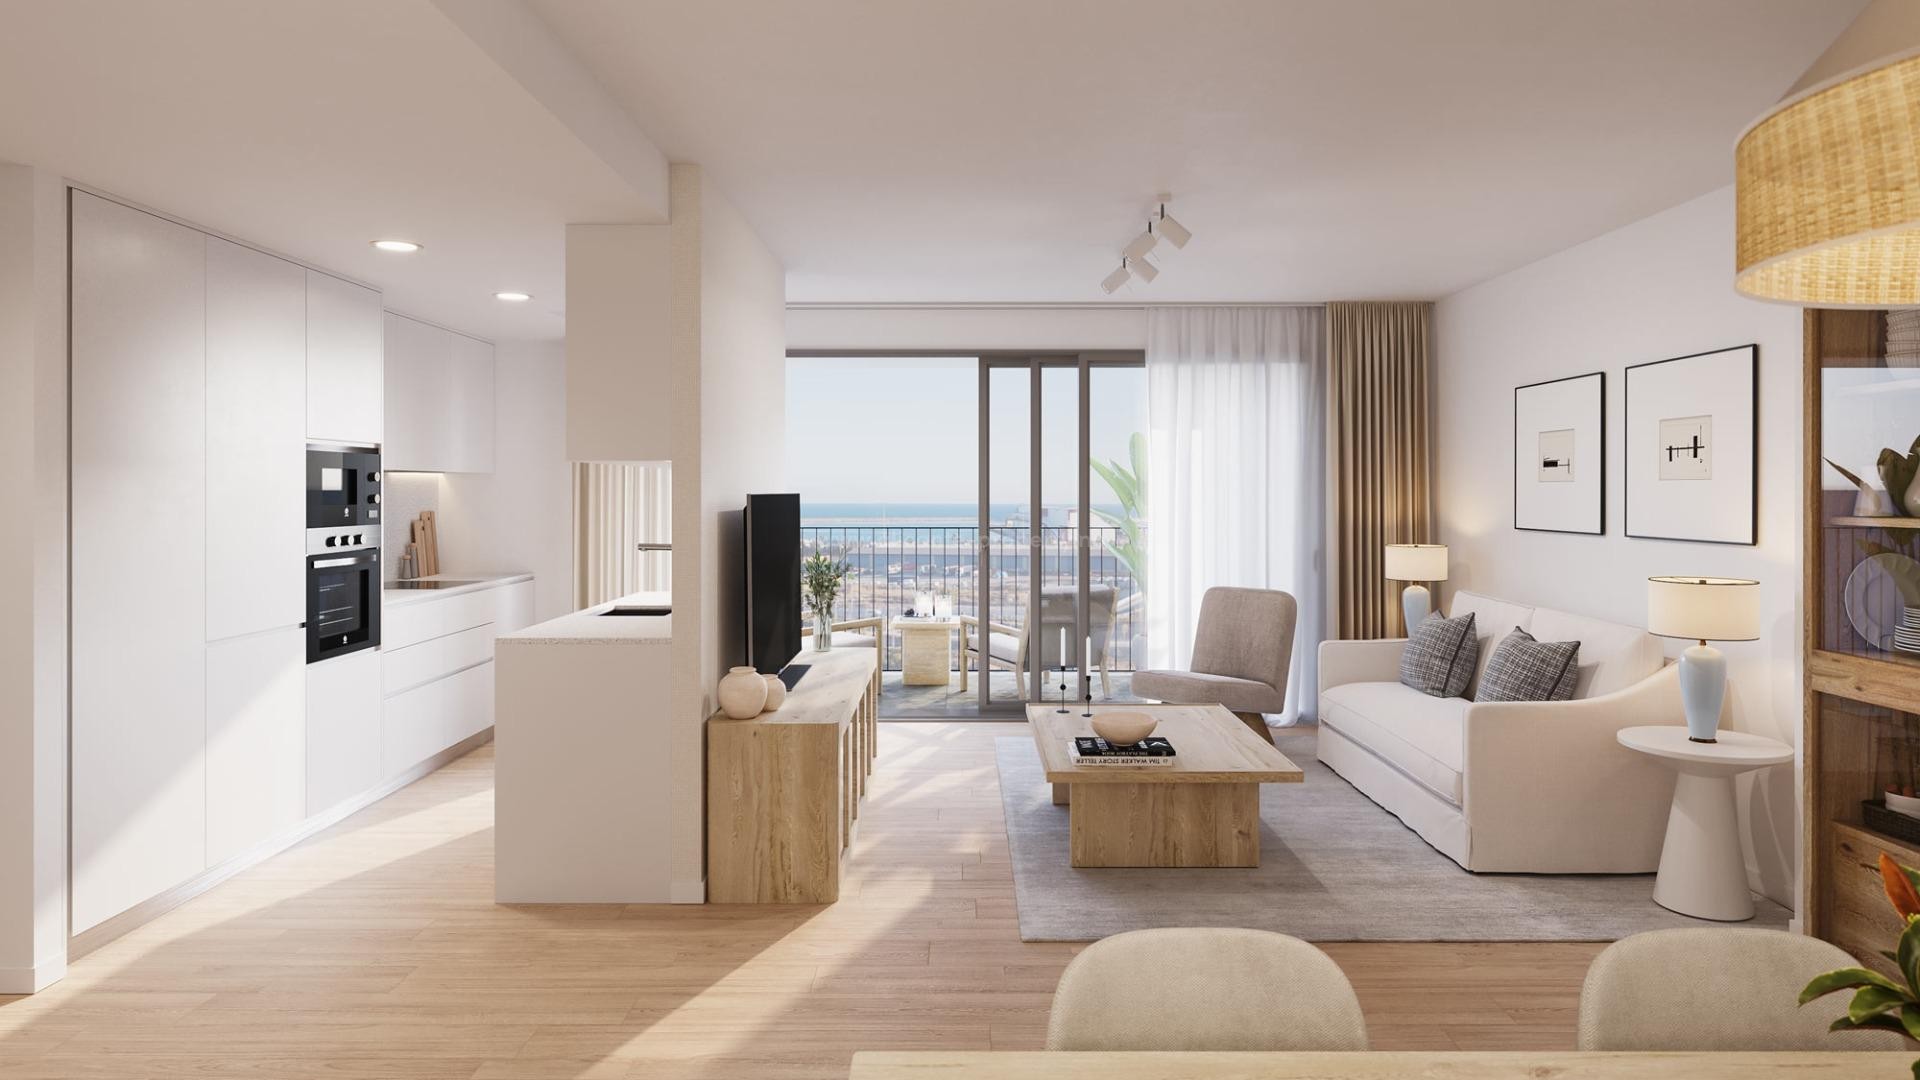 Exclusive apartments in Alicante city, 2/3/4 bedrooms, roof terrace w/panoramic view, pool, sun terrace and gym